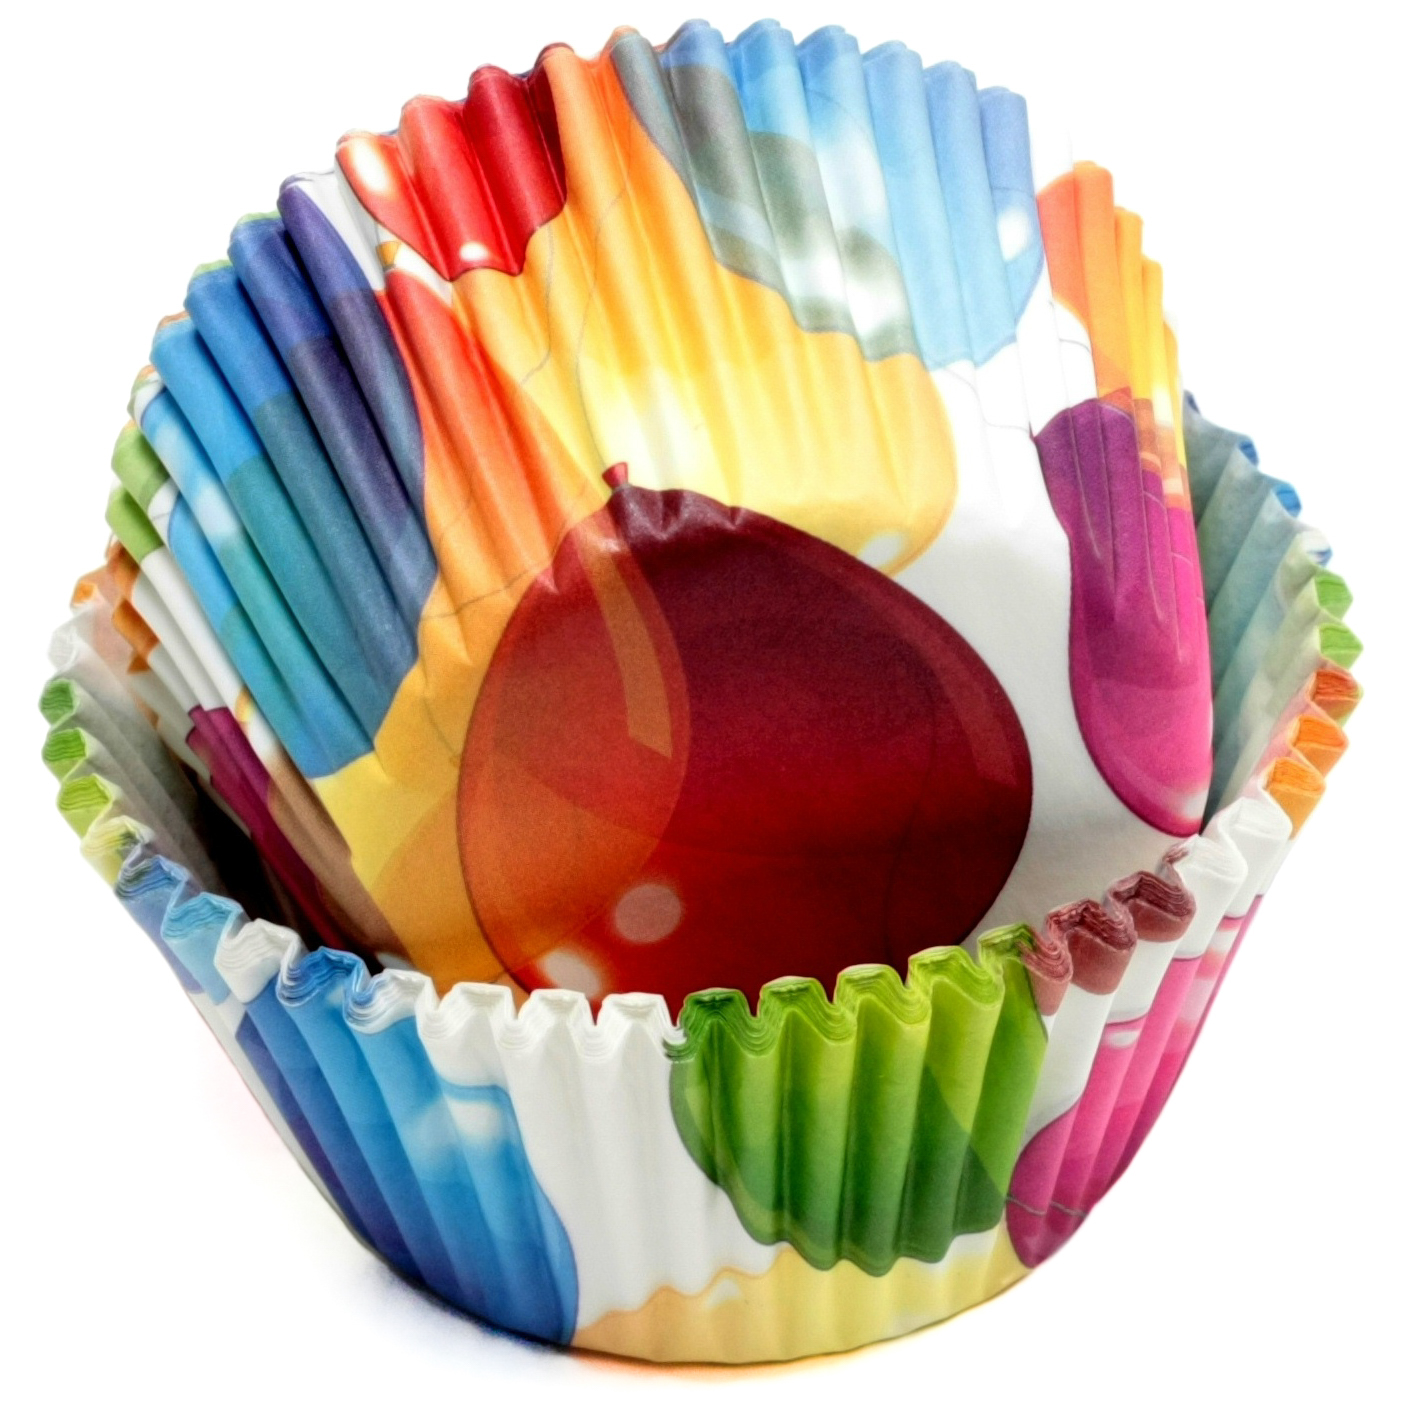 BALLOONs Baking Cups - 50-Pack